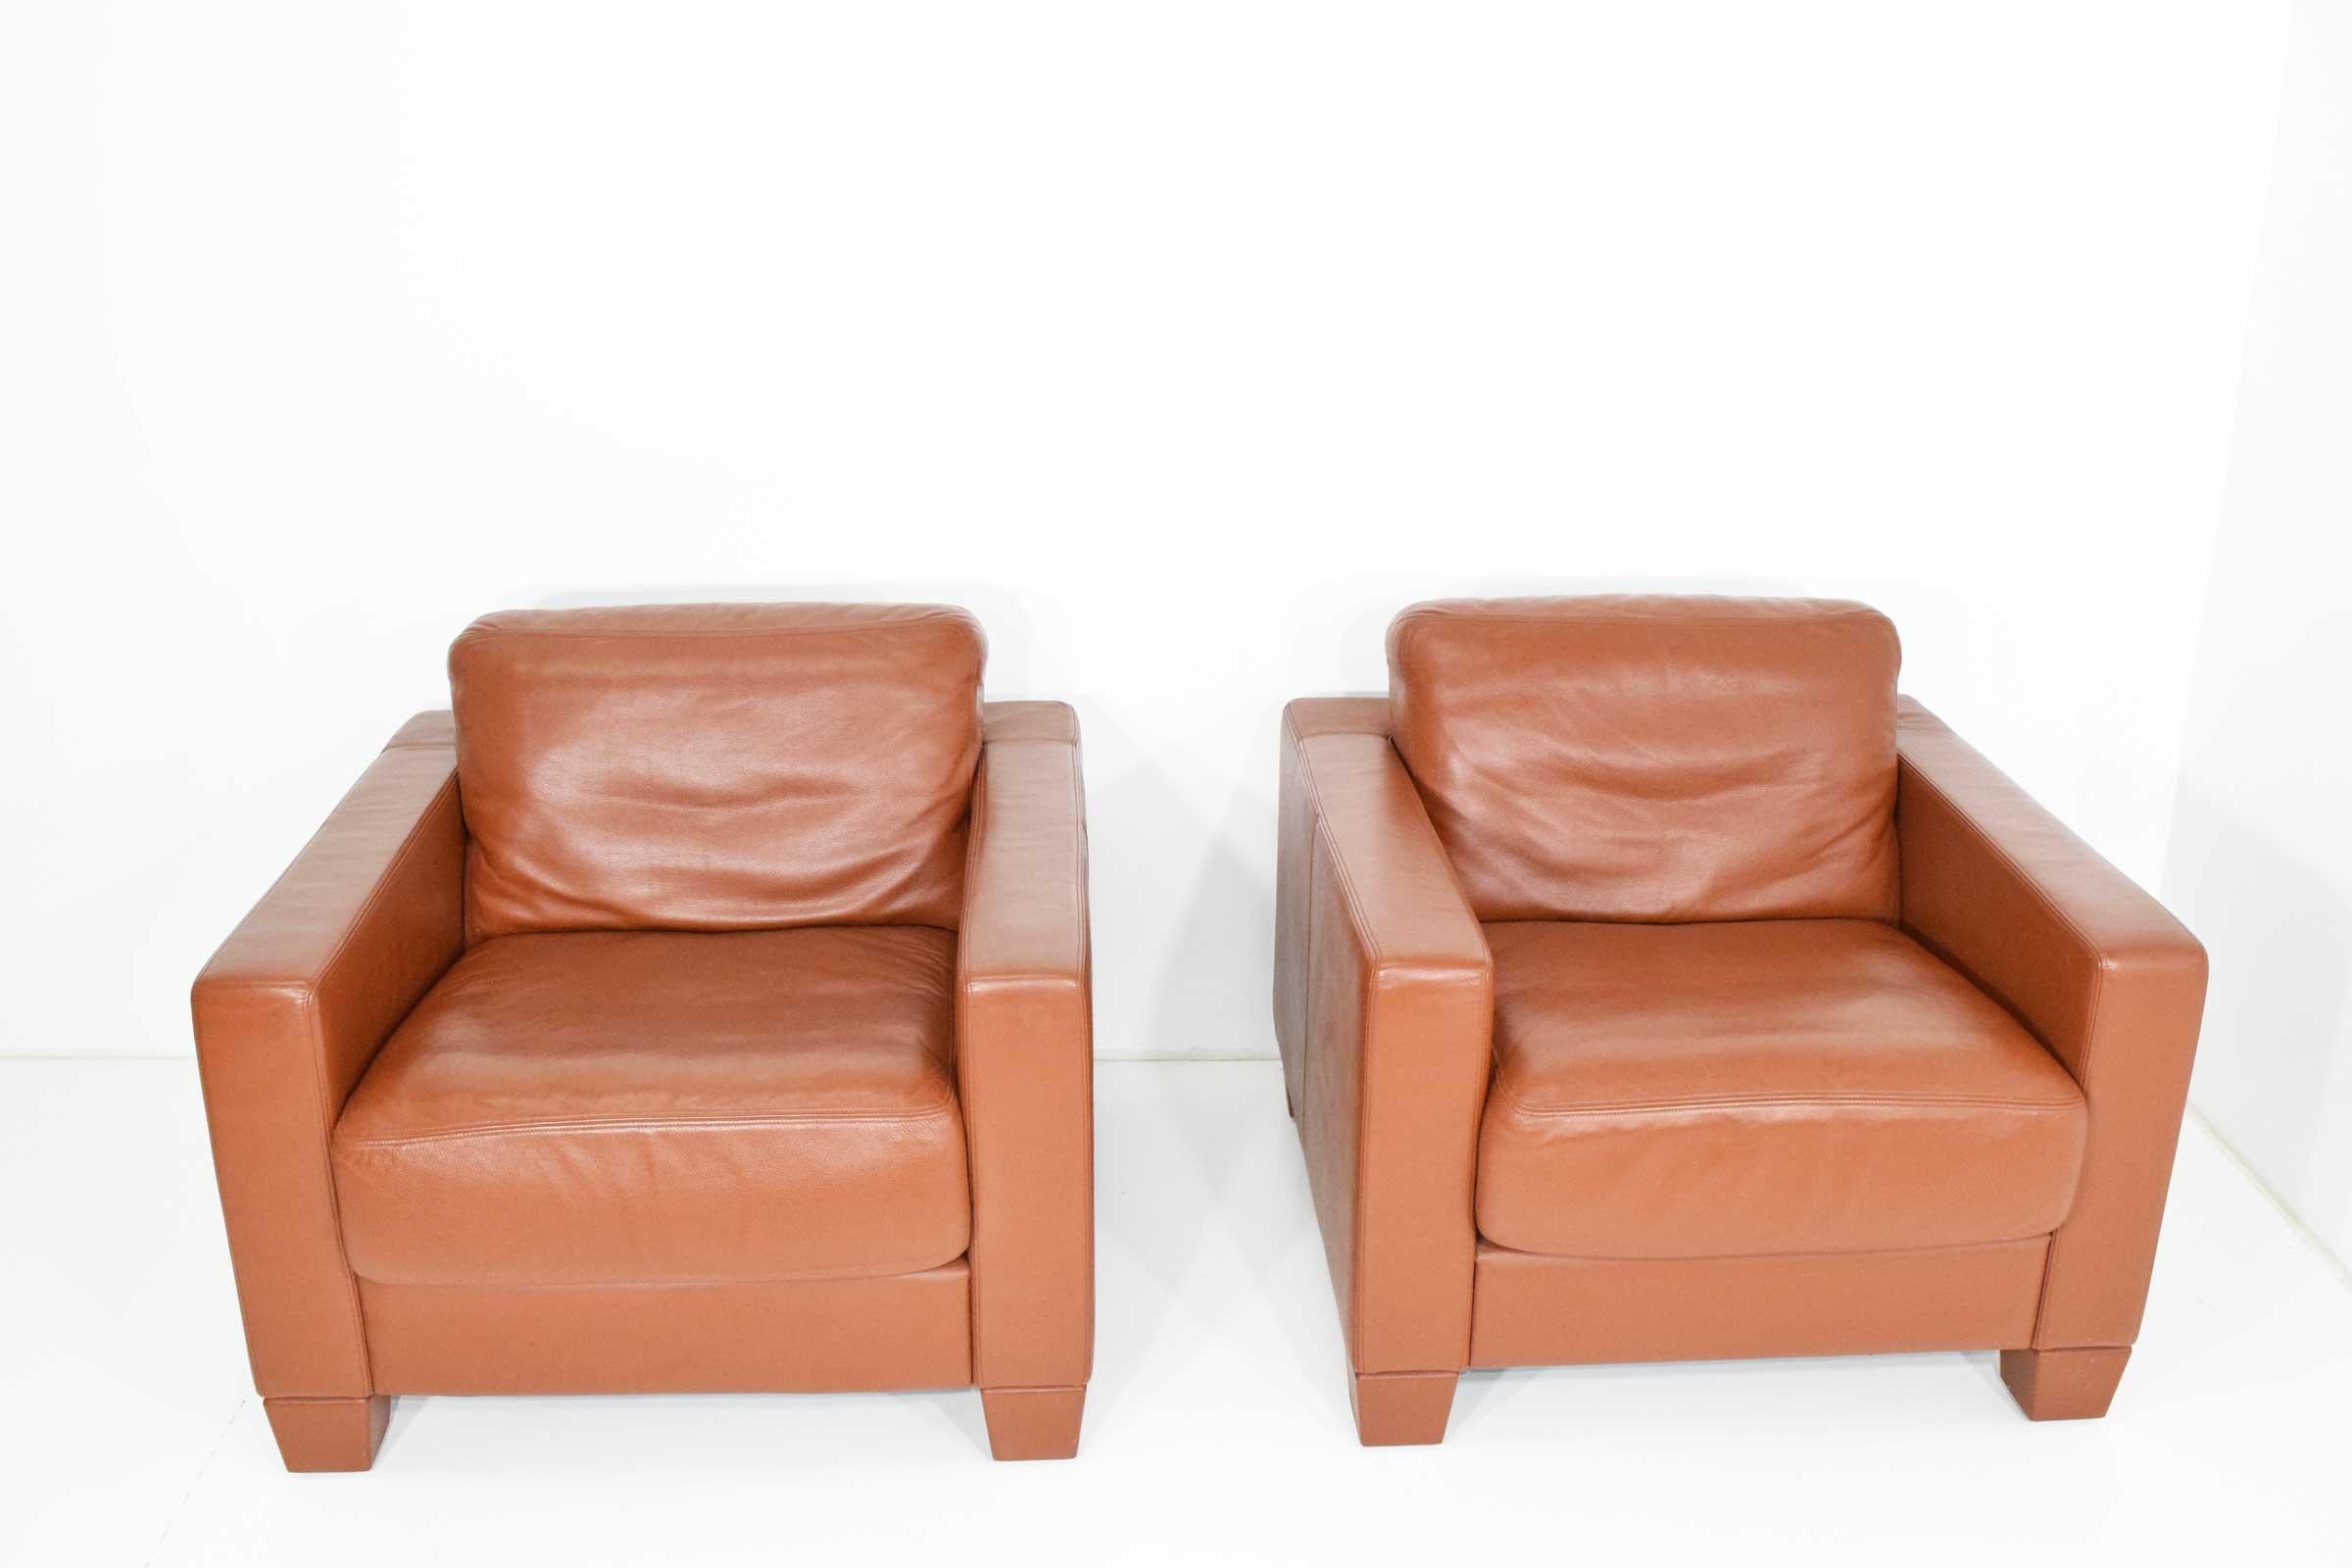 Model DS-17 in saddle or cognac leather. Beautiful condition. We have four and are offering in pairs. We also have the sofa that matches this set under a separate listing. Legs can be replaced with wood if desired. They screw on.